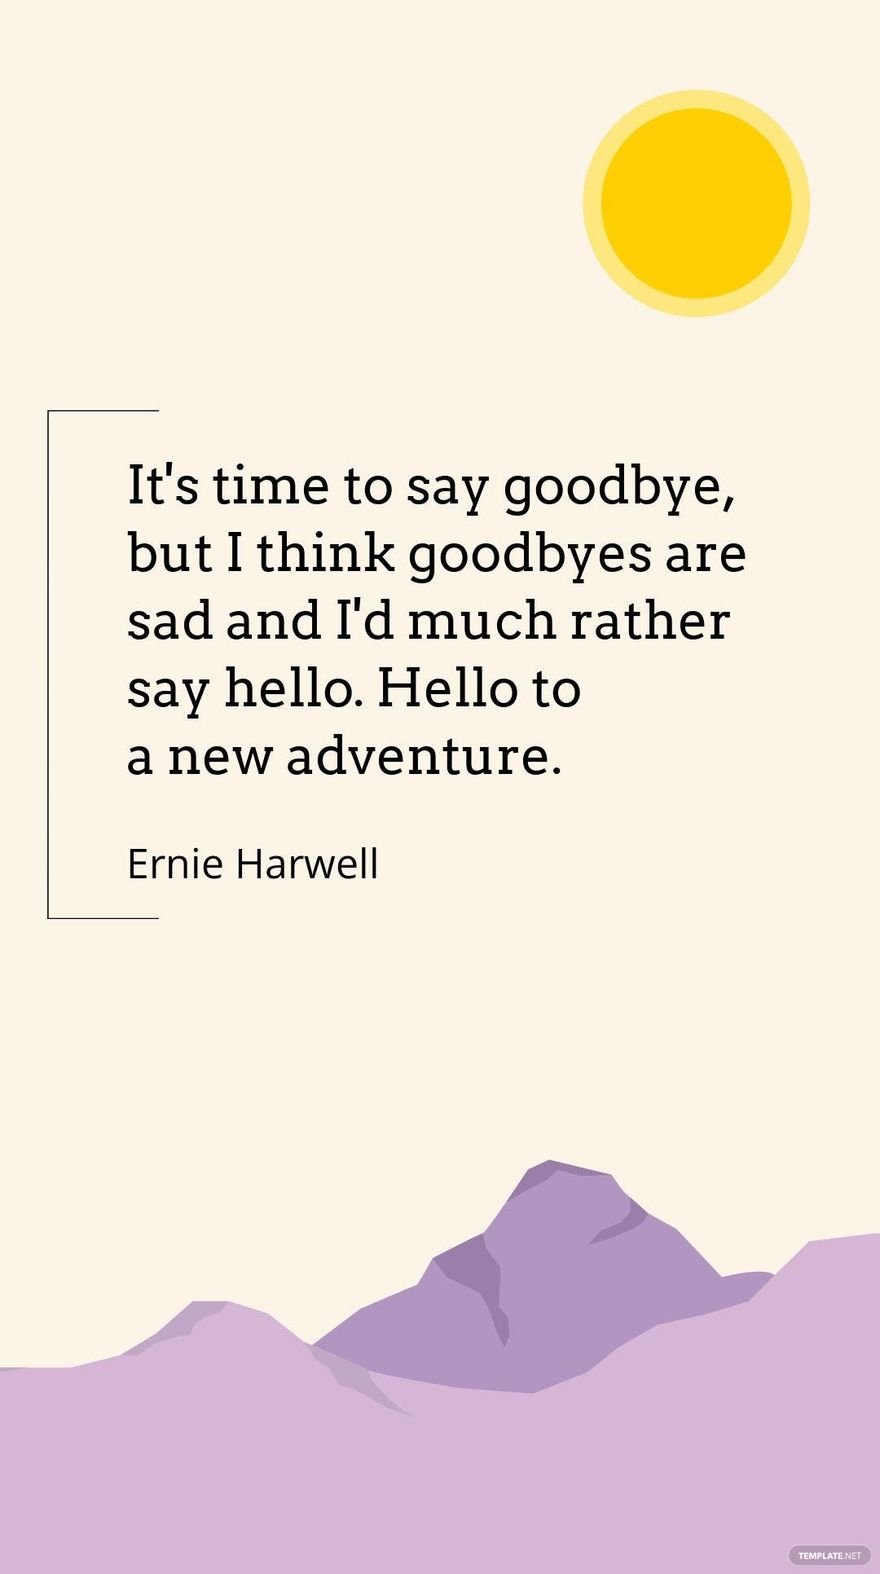 Ernie Harwell - It's time to say goodbye, but I think goodbyes are sad and I'd much rather say hello. Hello to a new adventure.